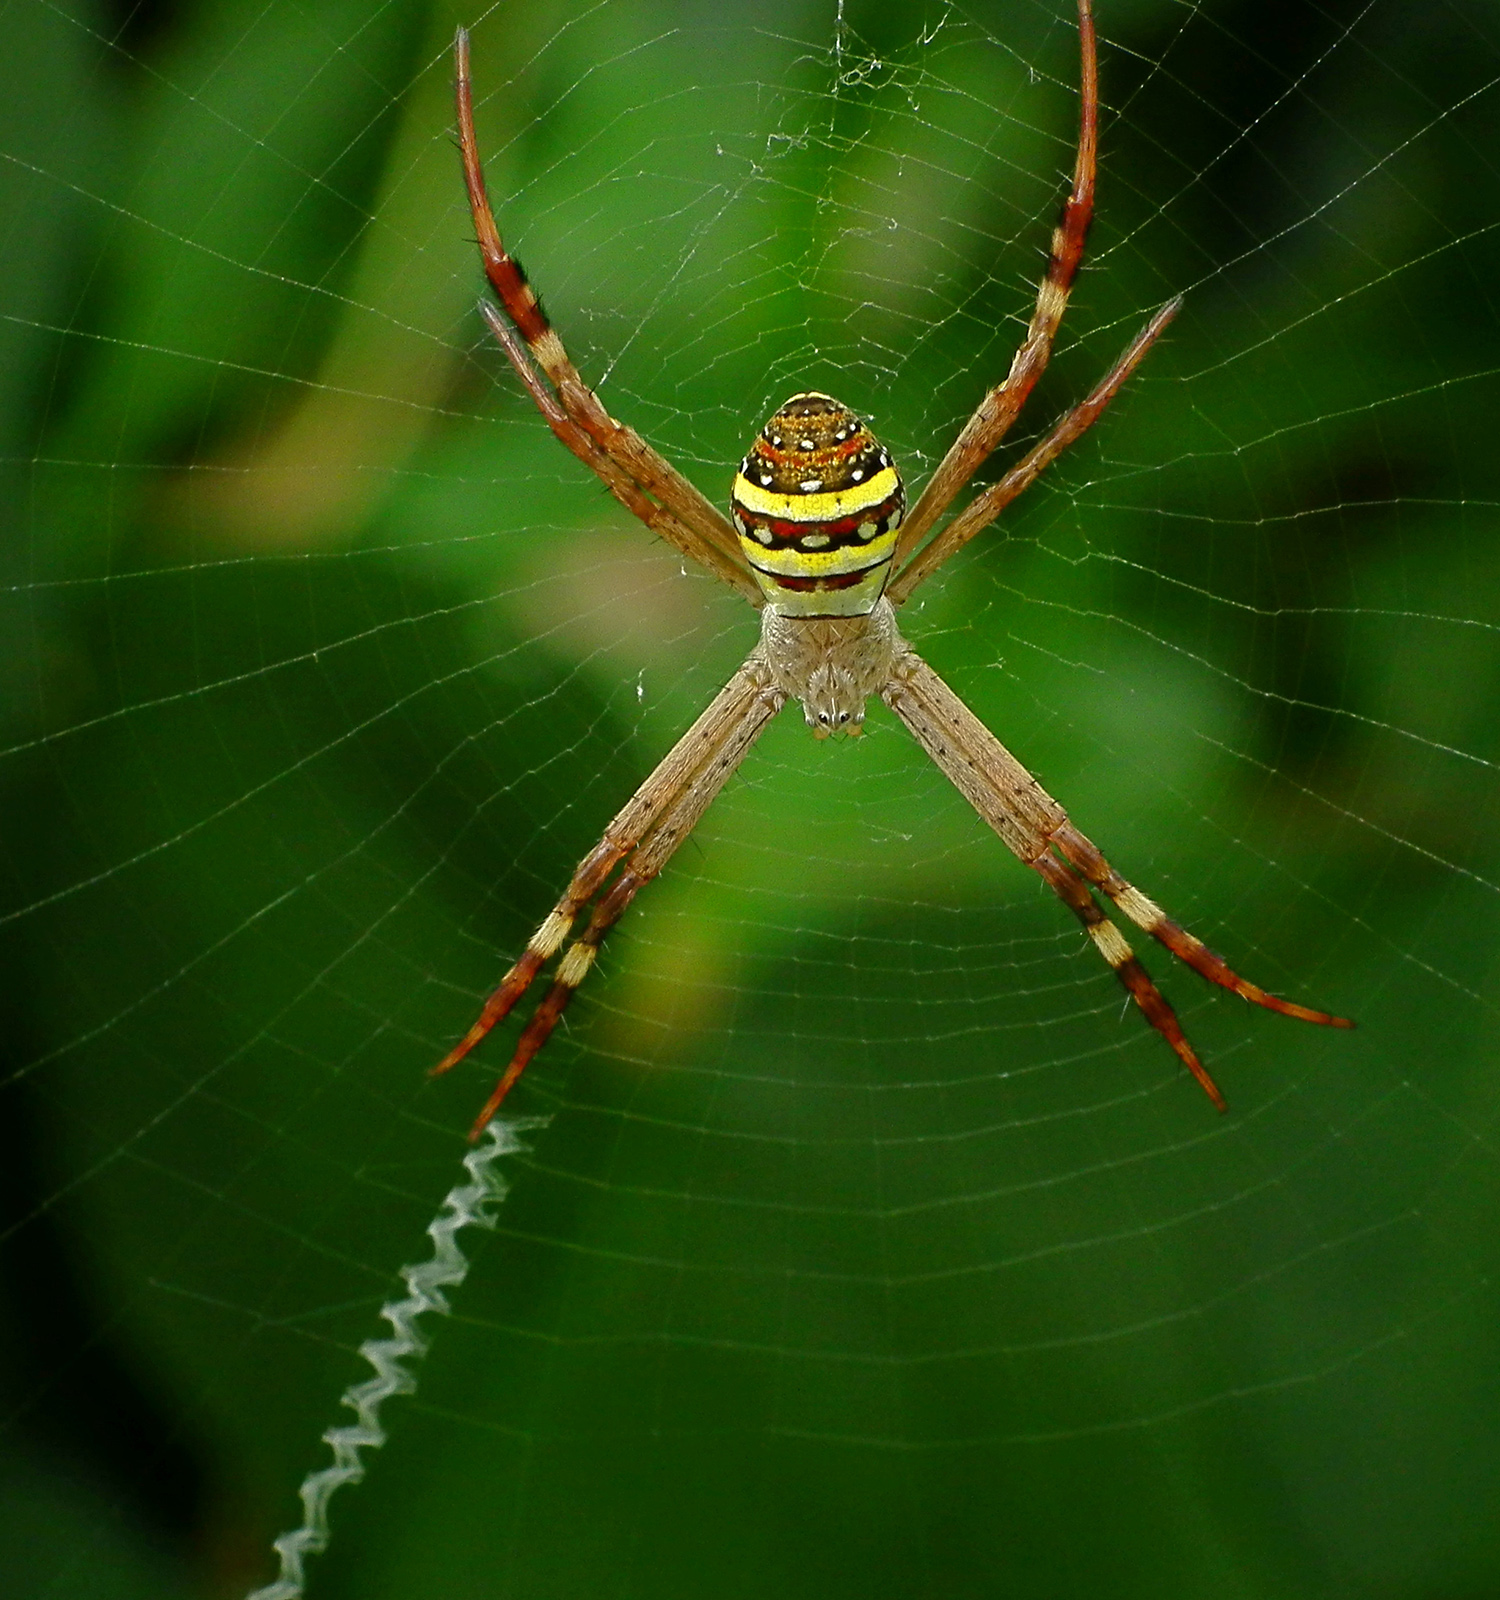 St Andrew's Cross female spider. Photo credit: James Niland via Foter.com / CC BY